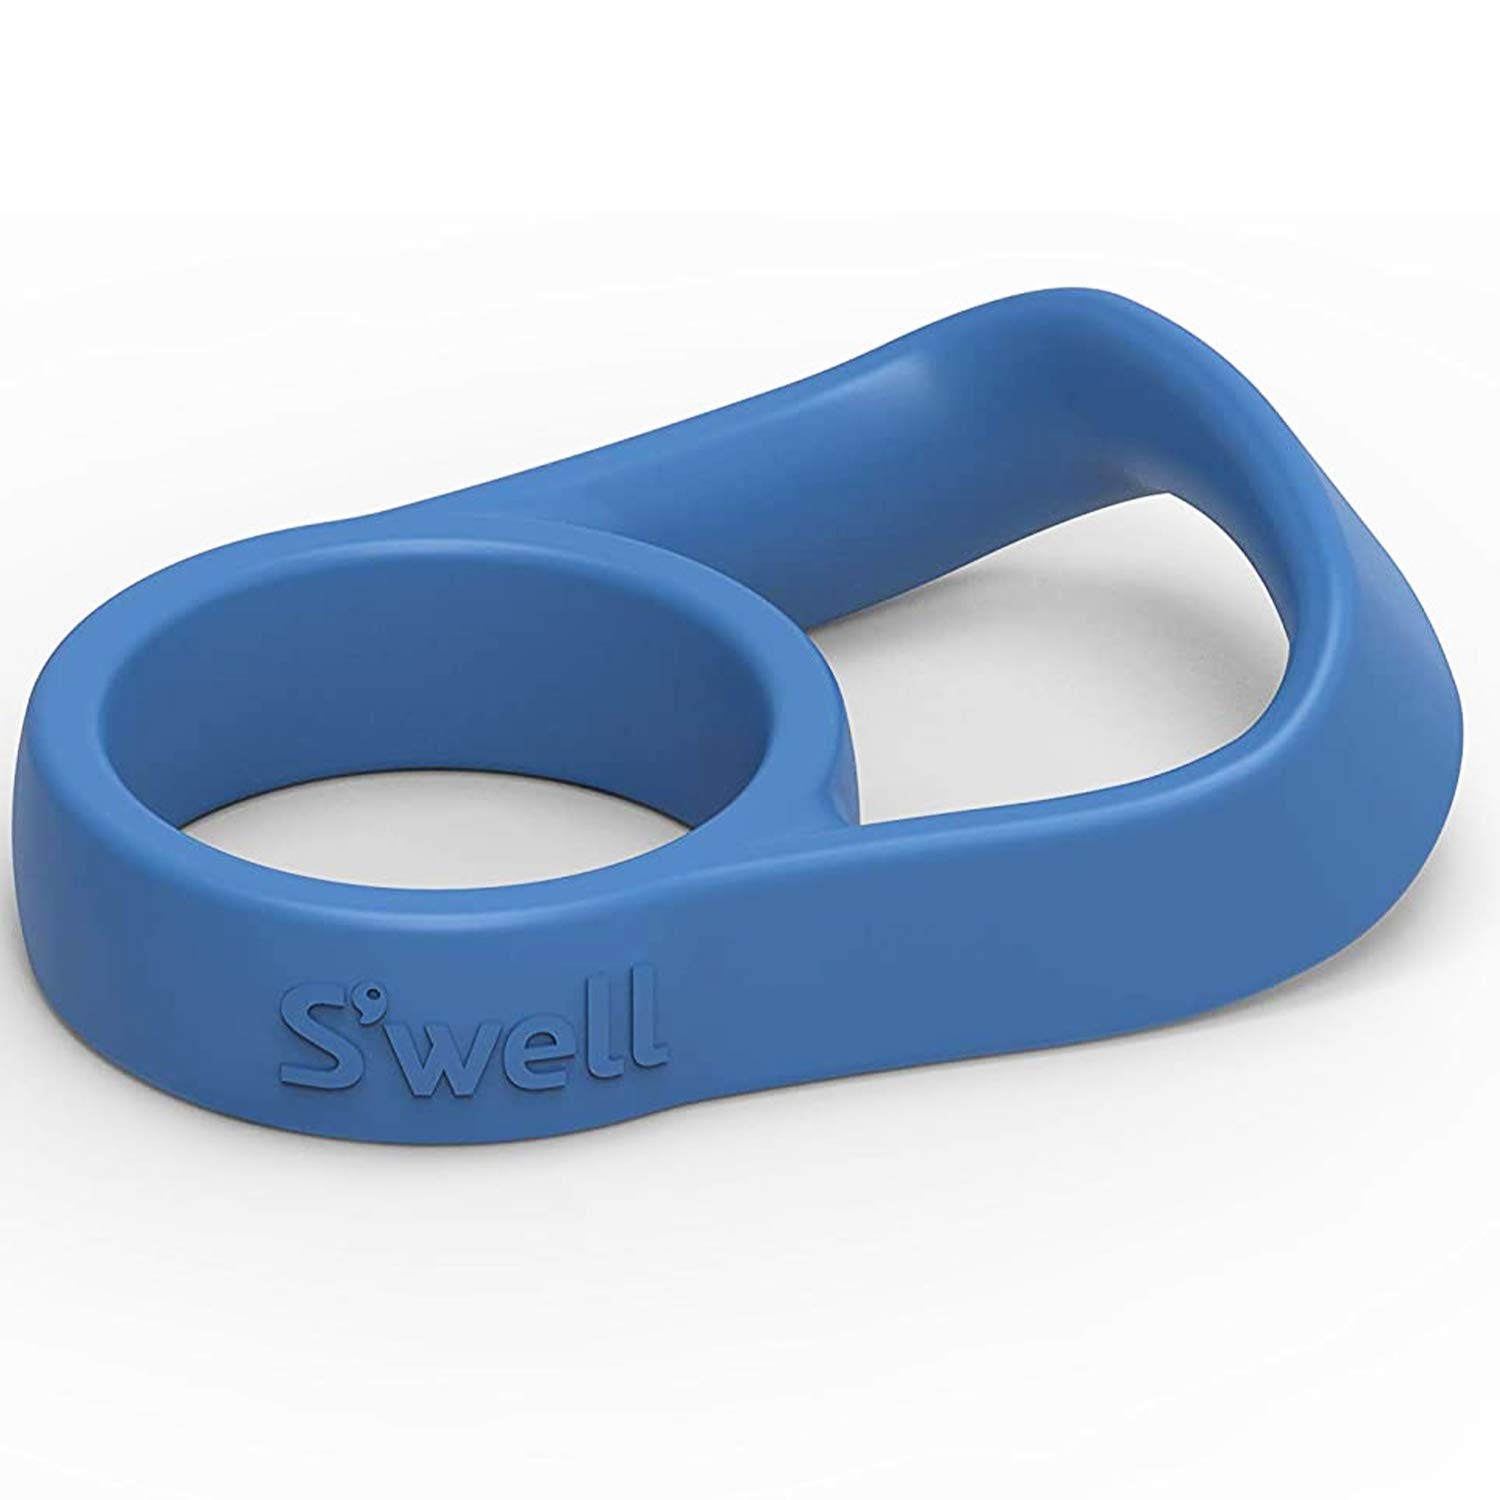 S'well Bottle Handle, Fits 9oz, 17oz, and 25oz Original Bottles, Blue, Comfortable Carrying On The Go, Flexible Silicone Grip, BPA Free